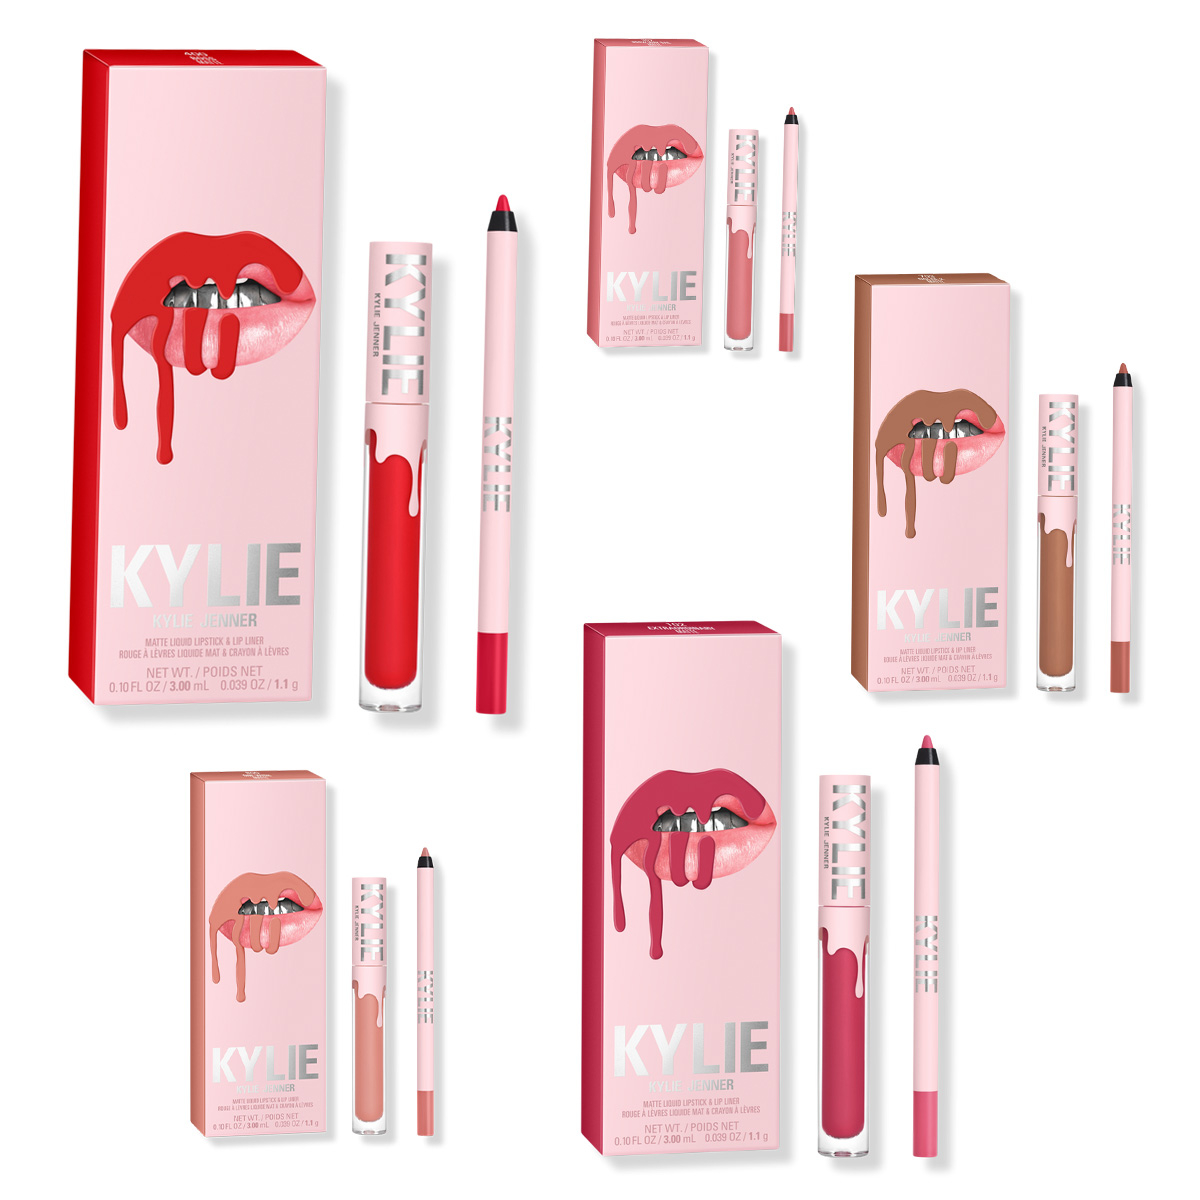 Kylie Cosmetics 24-Hour Deal: Get Kylie Jenner’s Lip Kits for 50% Off